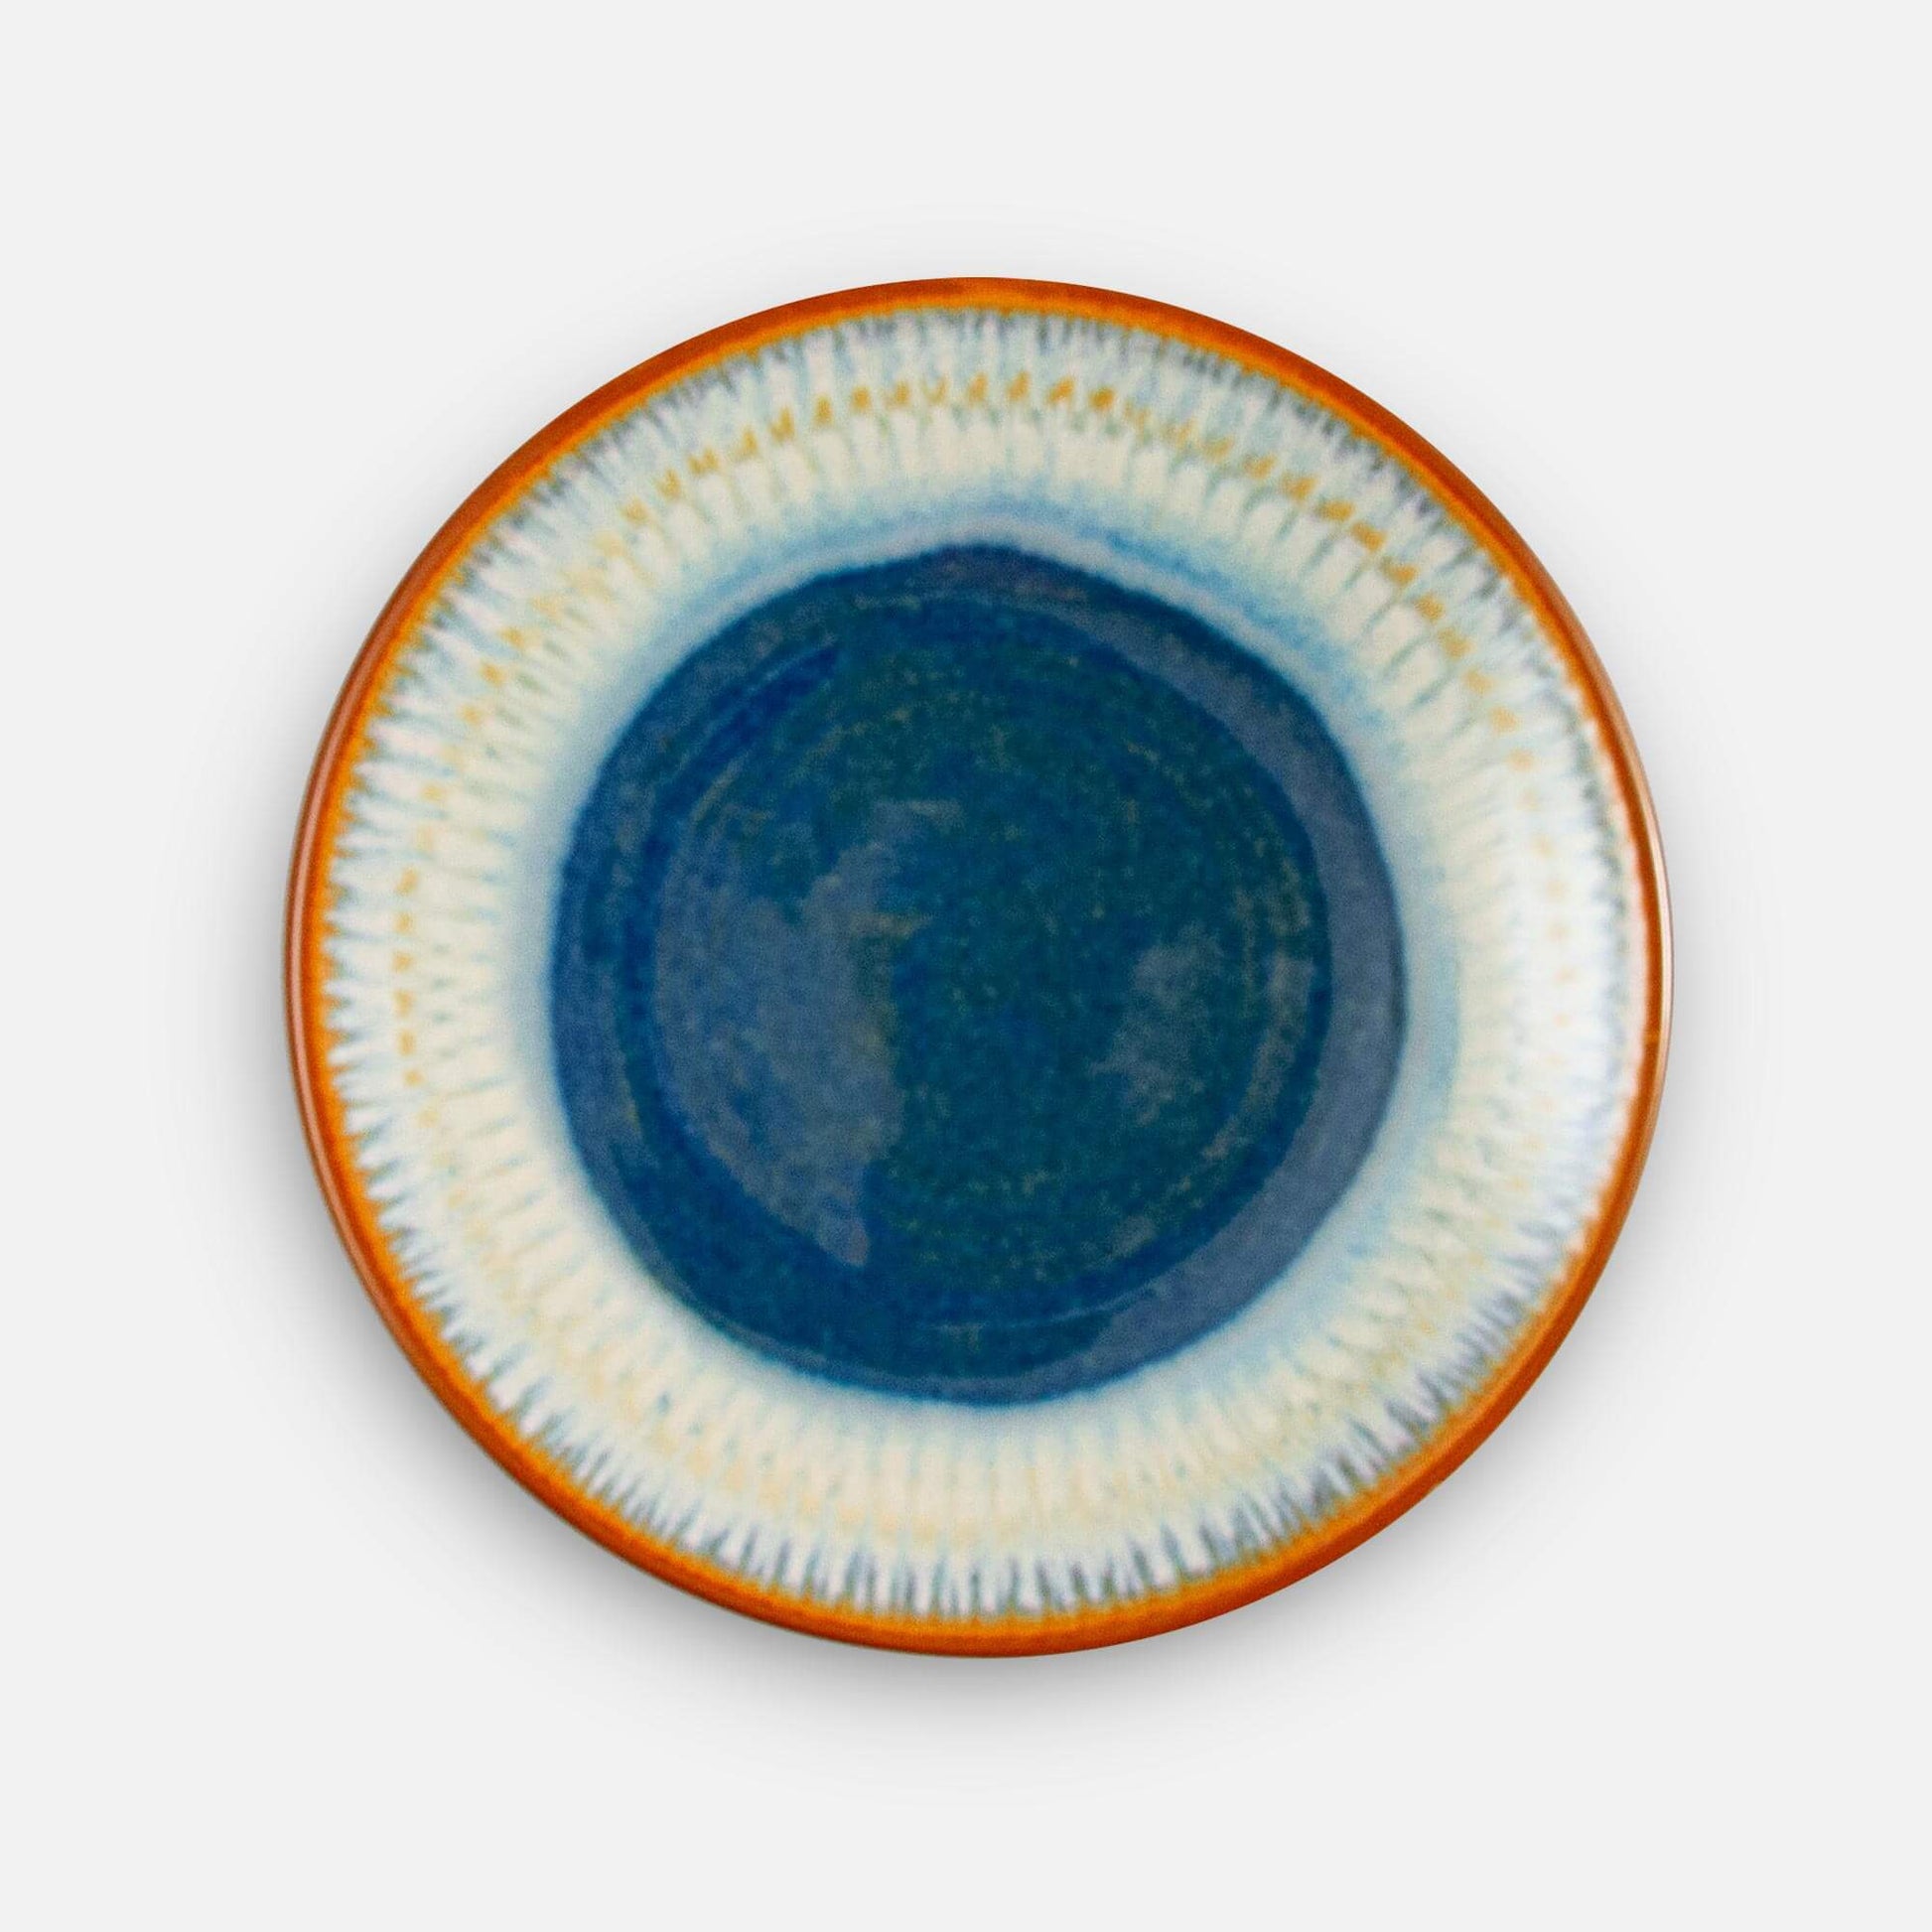 Handmade Pottery Classic Dinner Plate in Cobalt pattern made by Georgetown Pottery in Maine